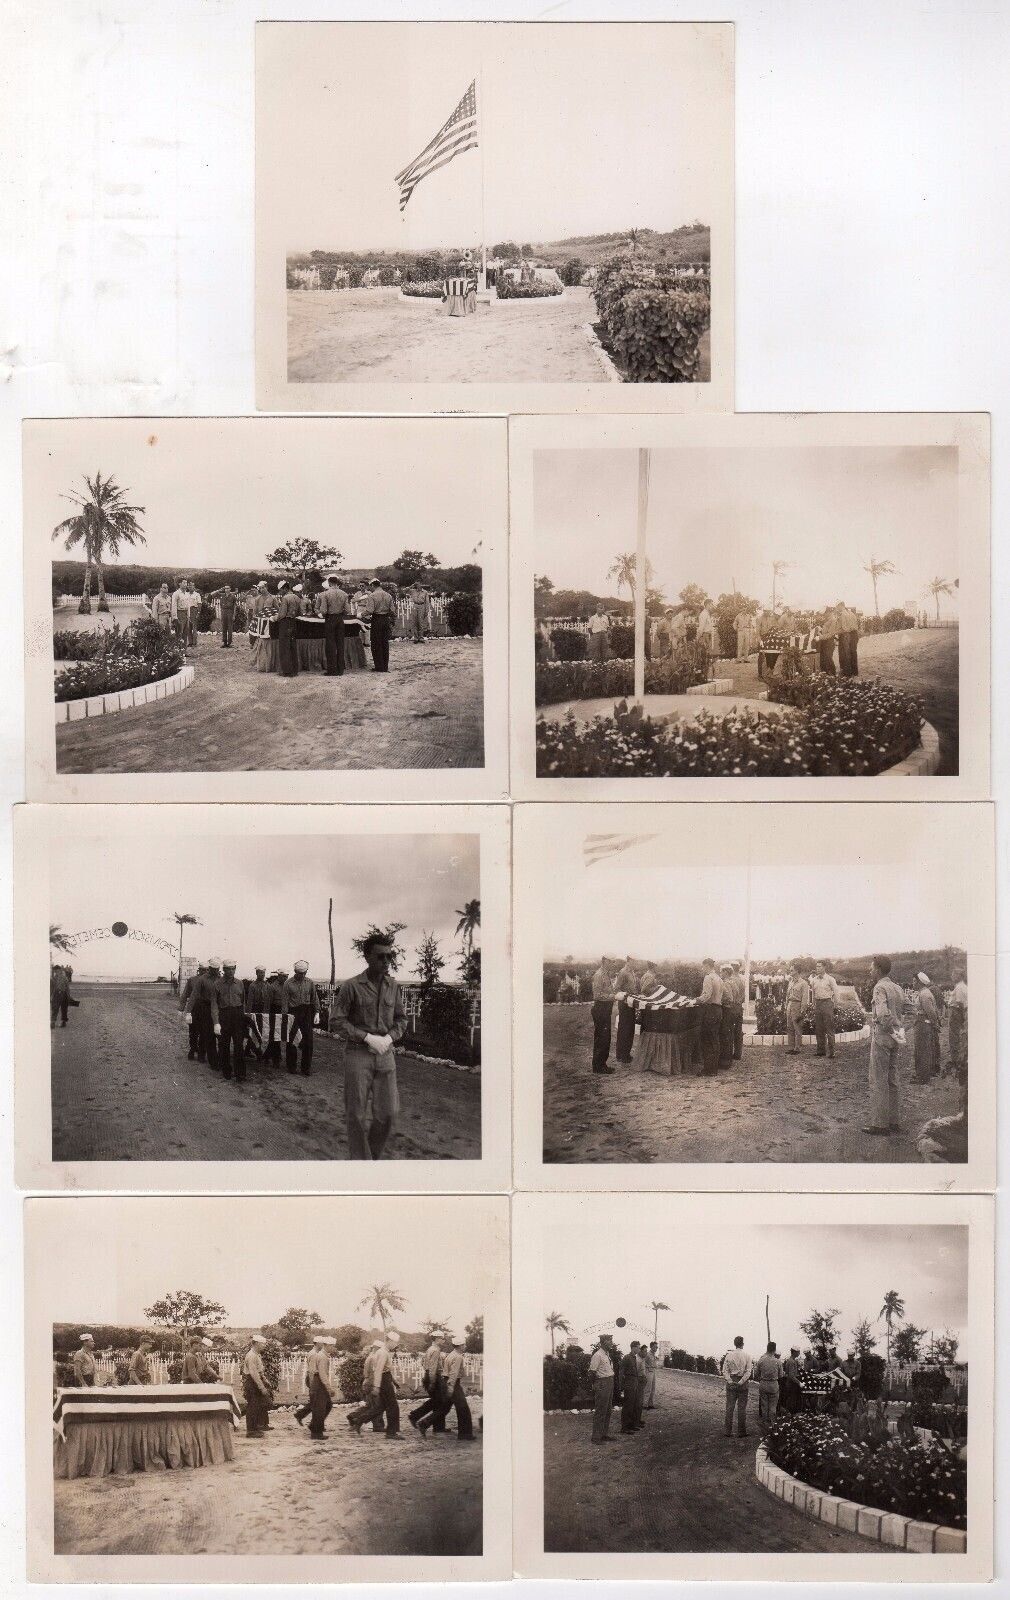 US Navy Burial Funeral Memorial 27th Division Cemetery Vintage Snapshot Photos